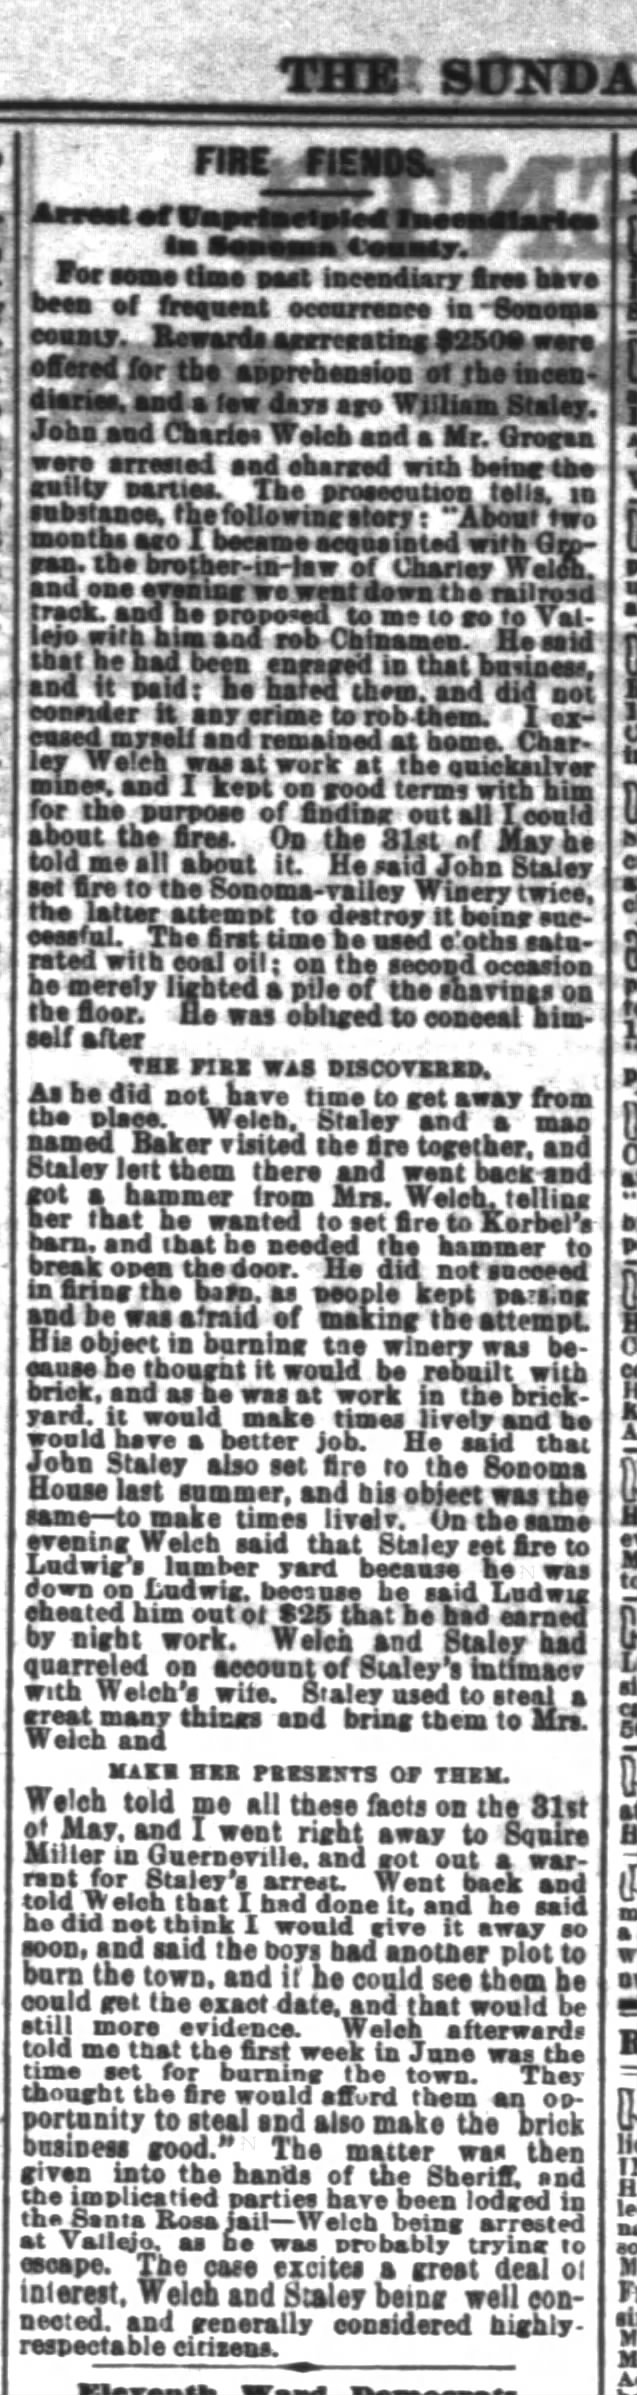 S.F. Chronicle Jun 8 1879 Charles Welch troubles